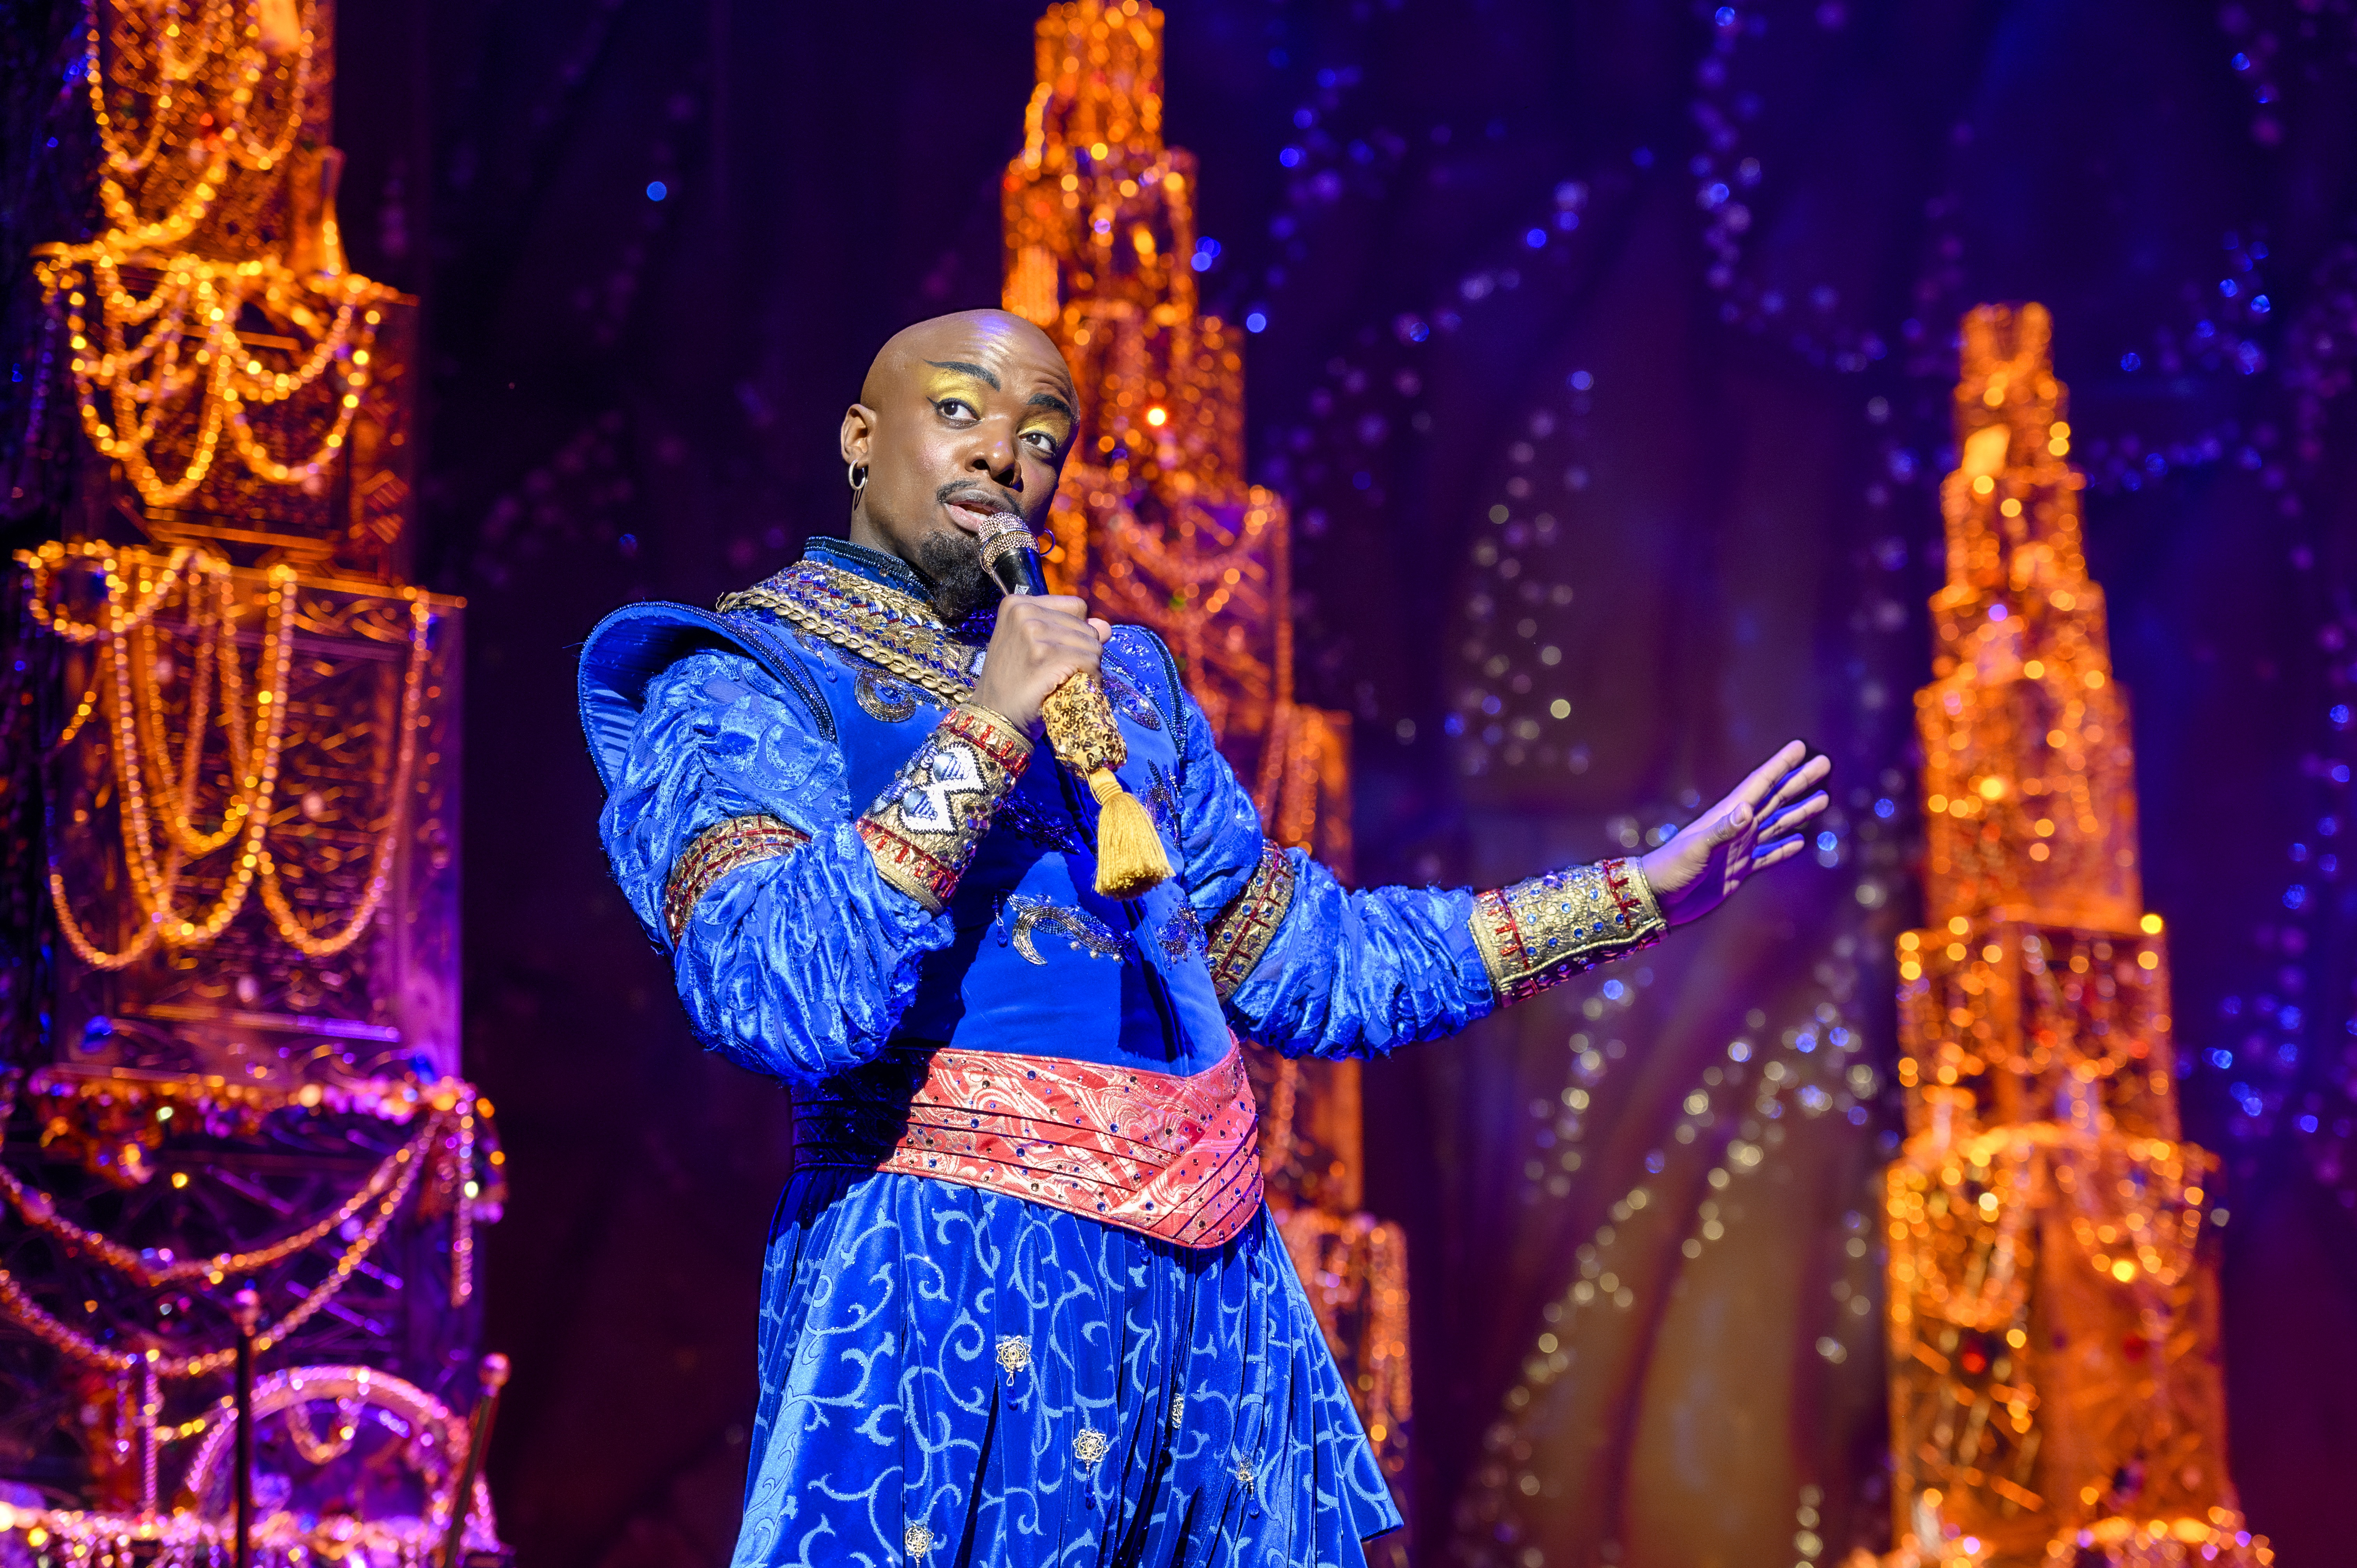 Yeukayi Ushe (Genie) on stage during the production of Disney's Aladdin.